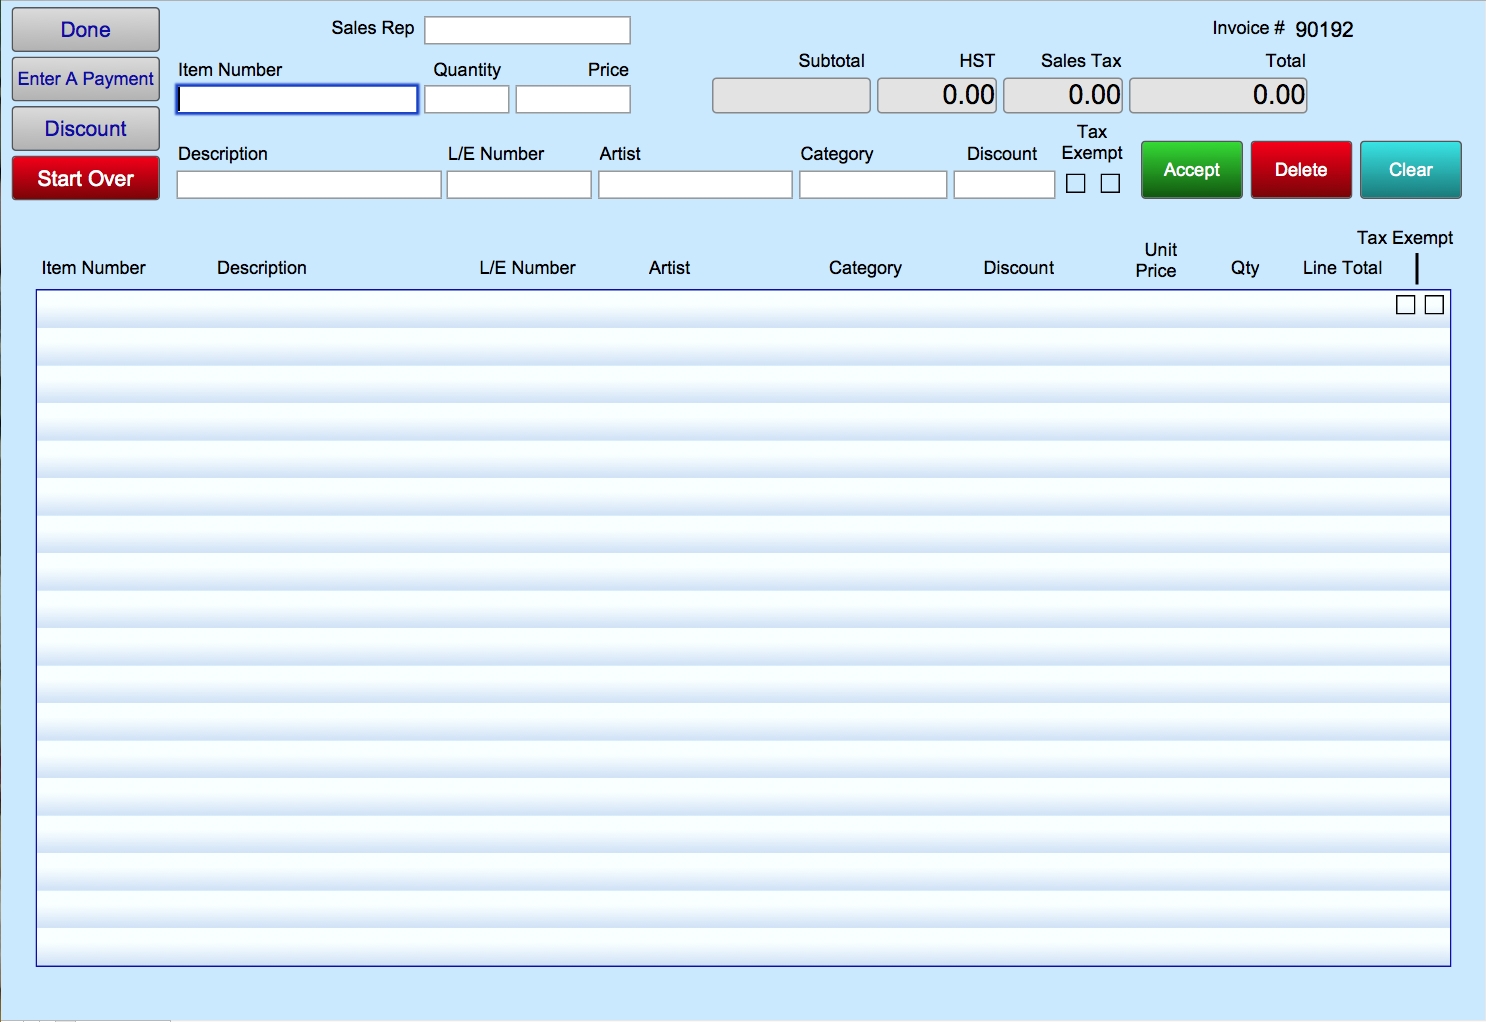 rapid entry screen for retail products invoice file frameready return to invoice